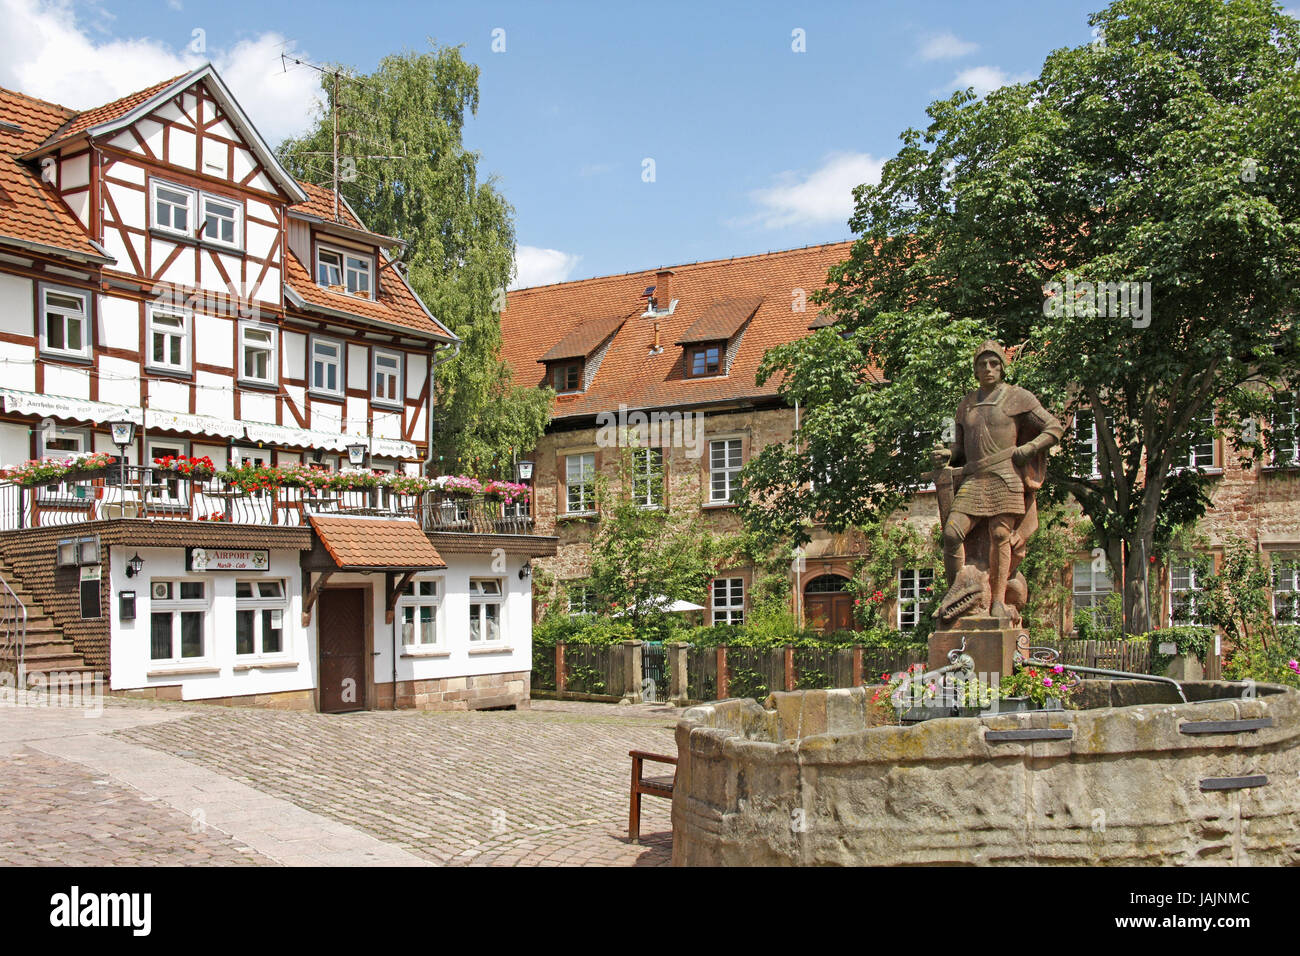 Germany,Hessen,slot,marketplace,well,St. Georg,Northern Hessen,well character,Old Town,half-timbered house,building,Old Town,market well,nobody, Stock Photo